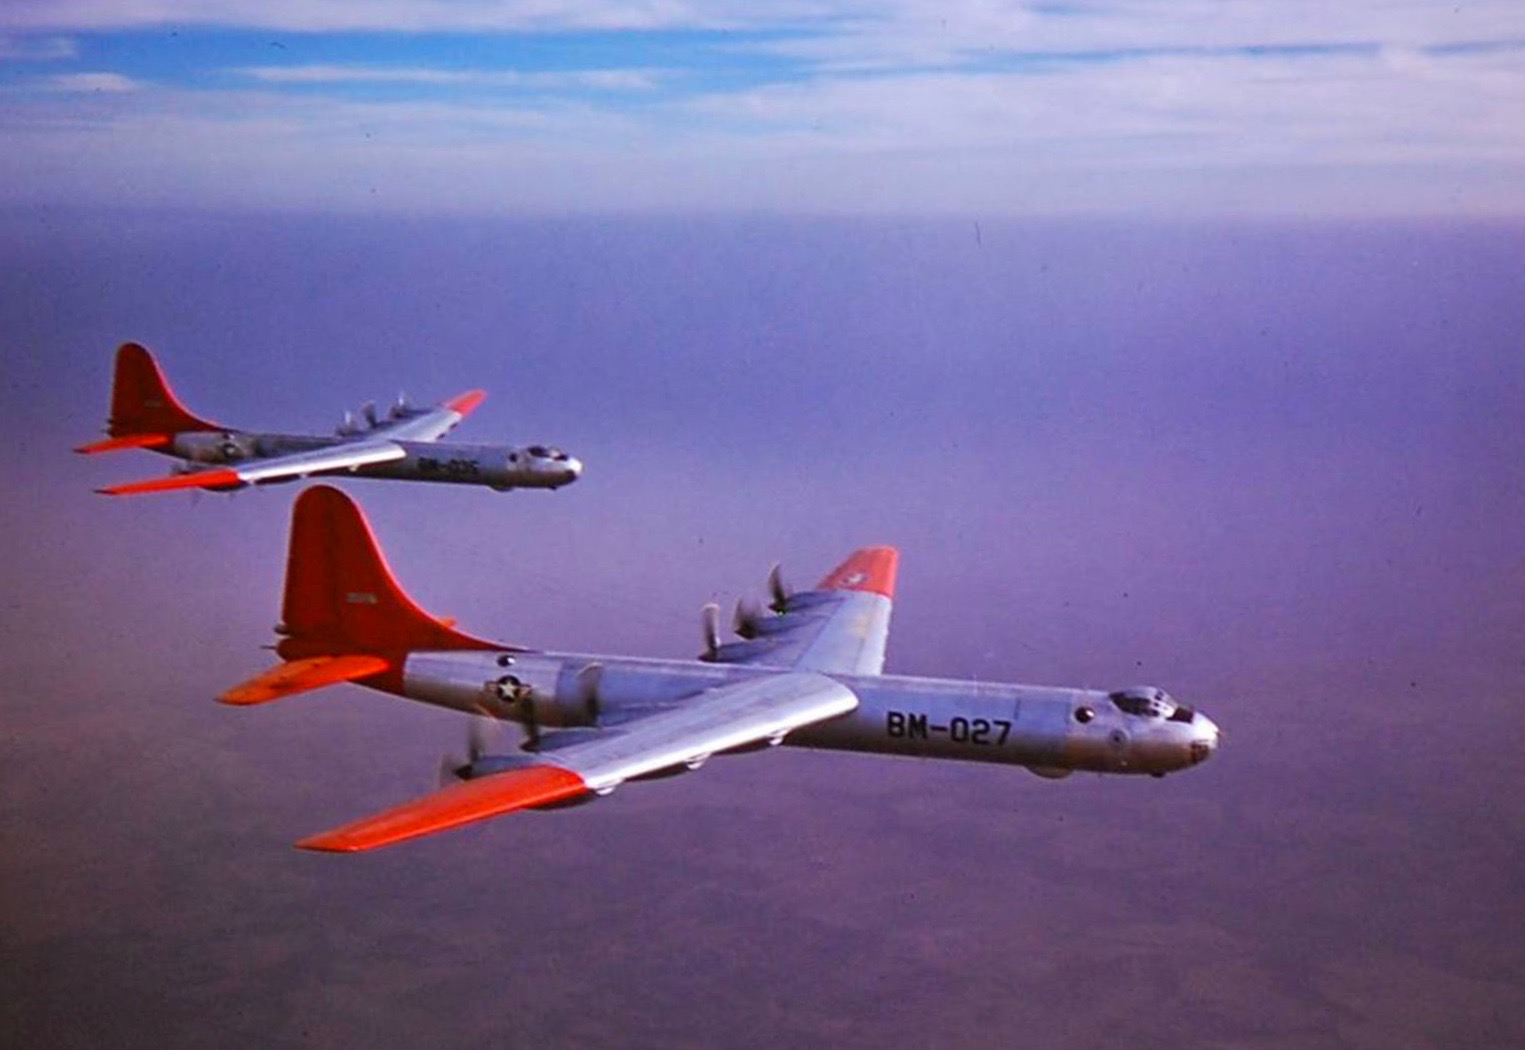 62 years ago the B-36 Peacemaker made its last flight - Aeroflap